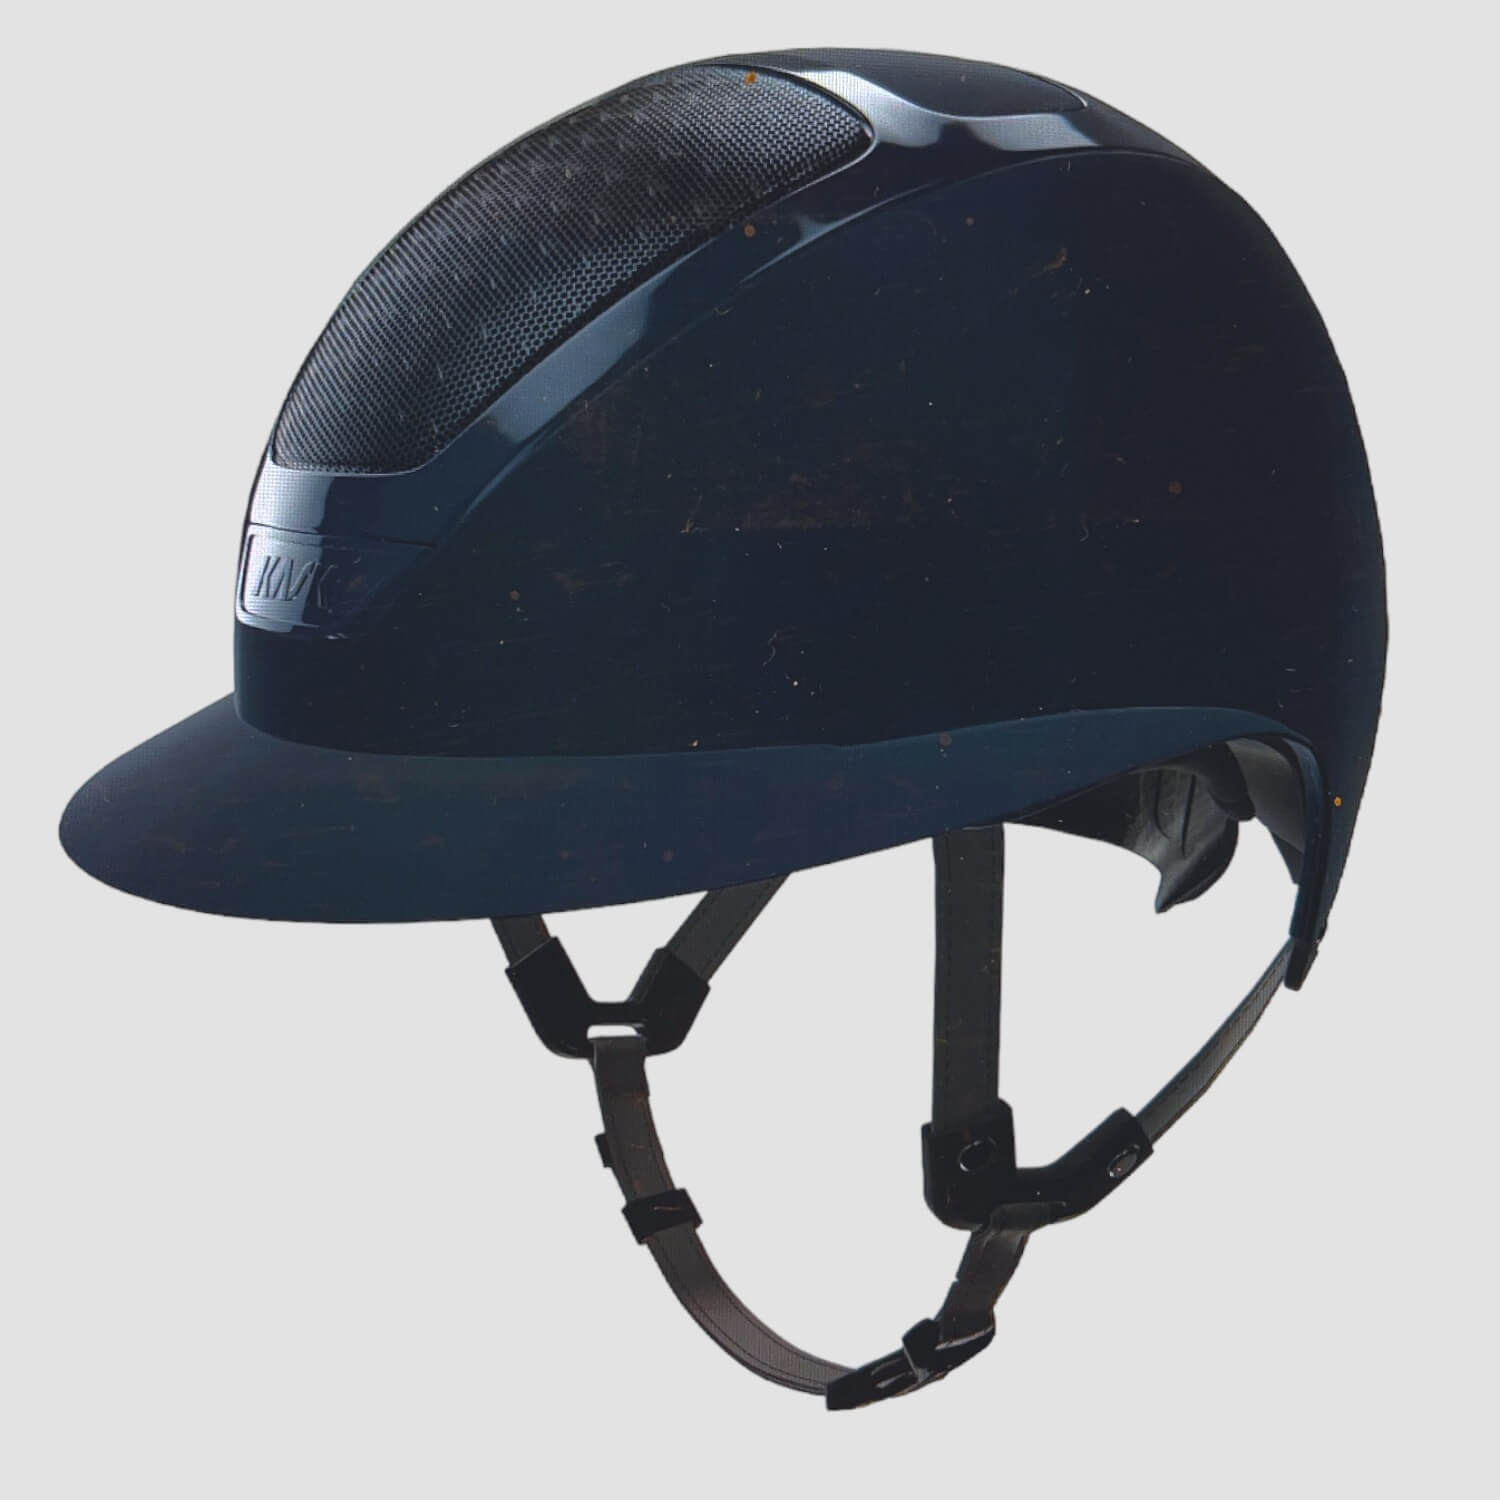 Kask Star Lady chrome Navy neues Modell